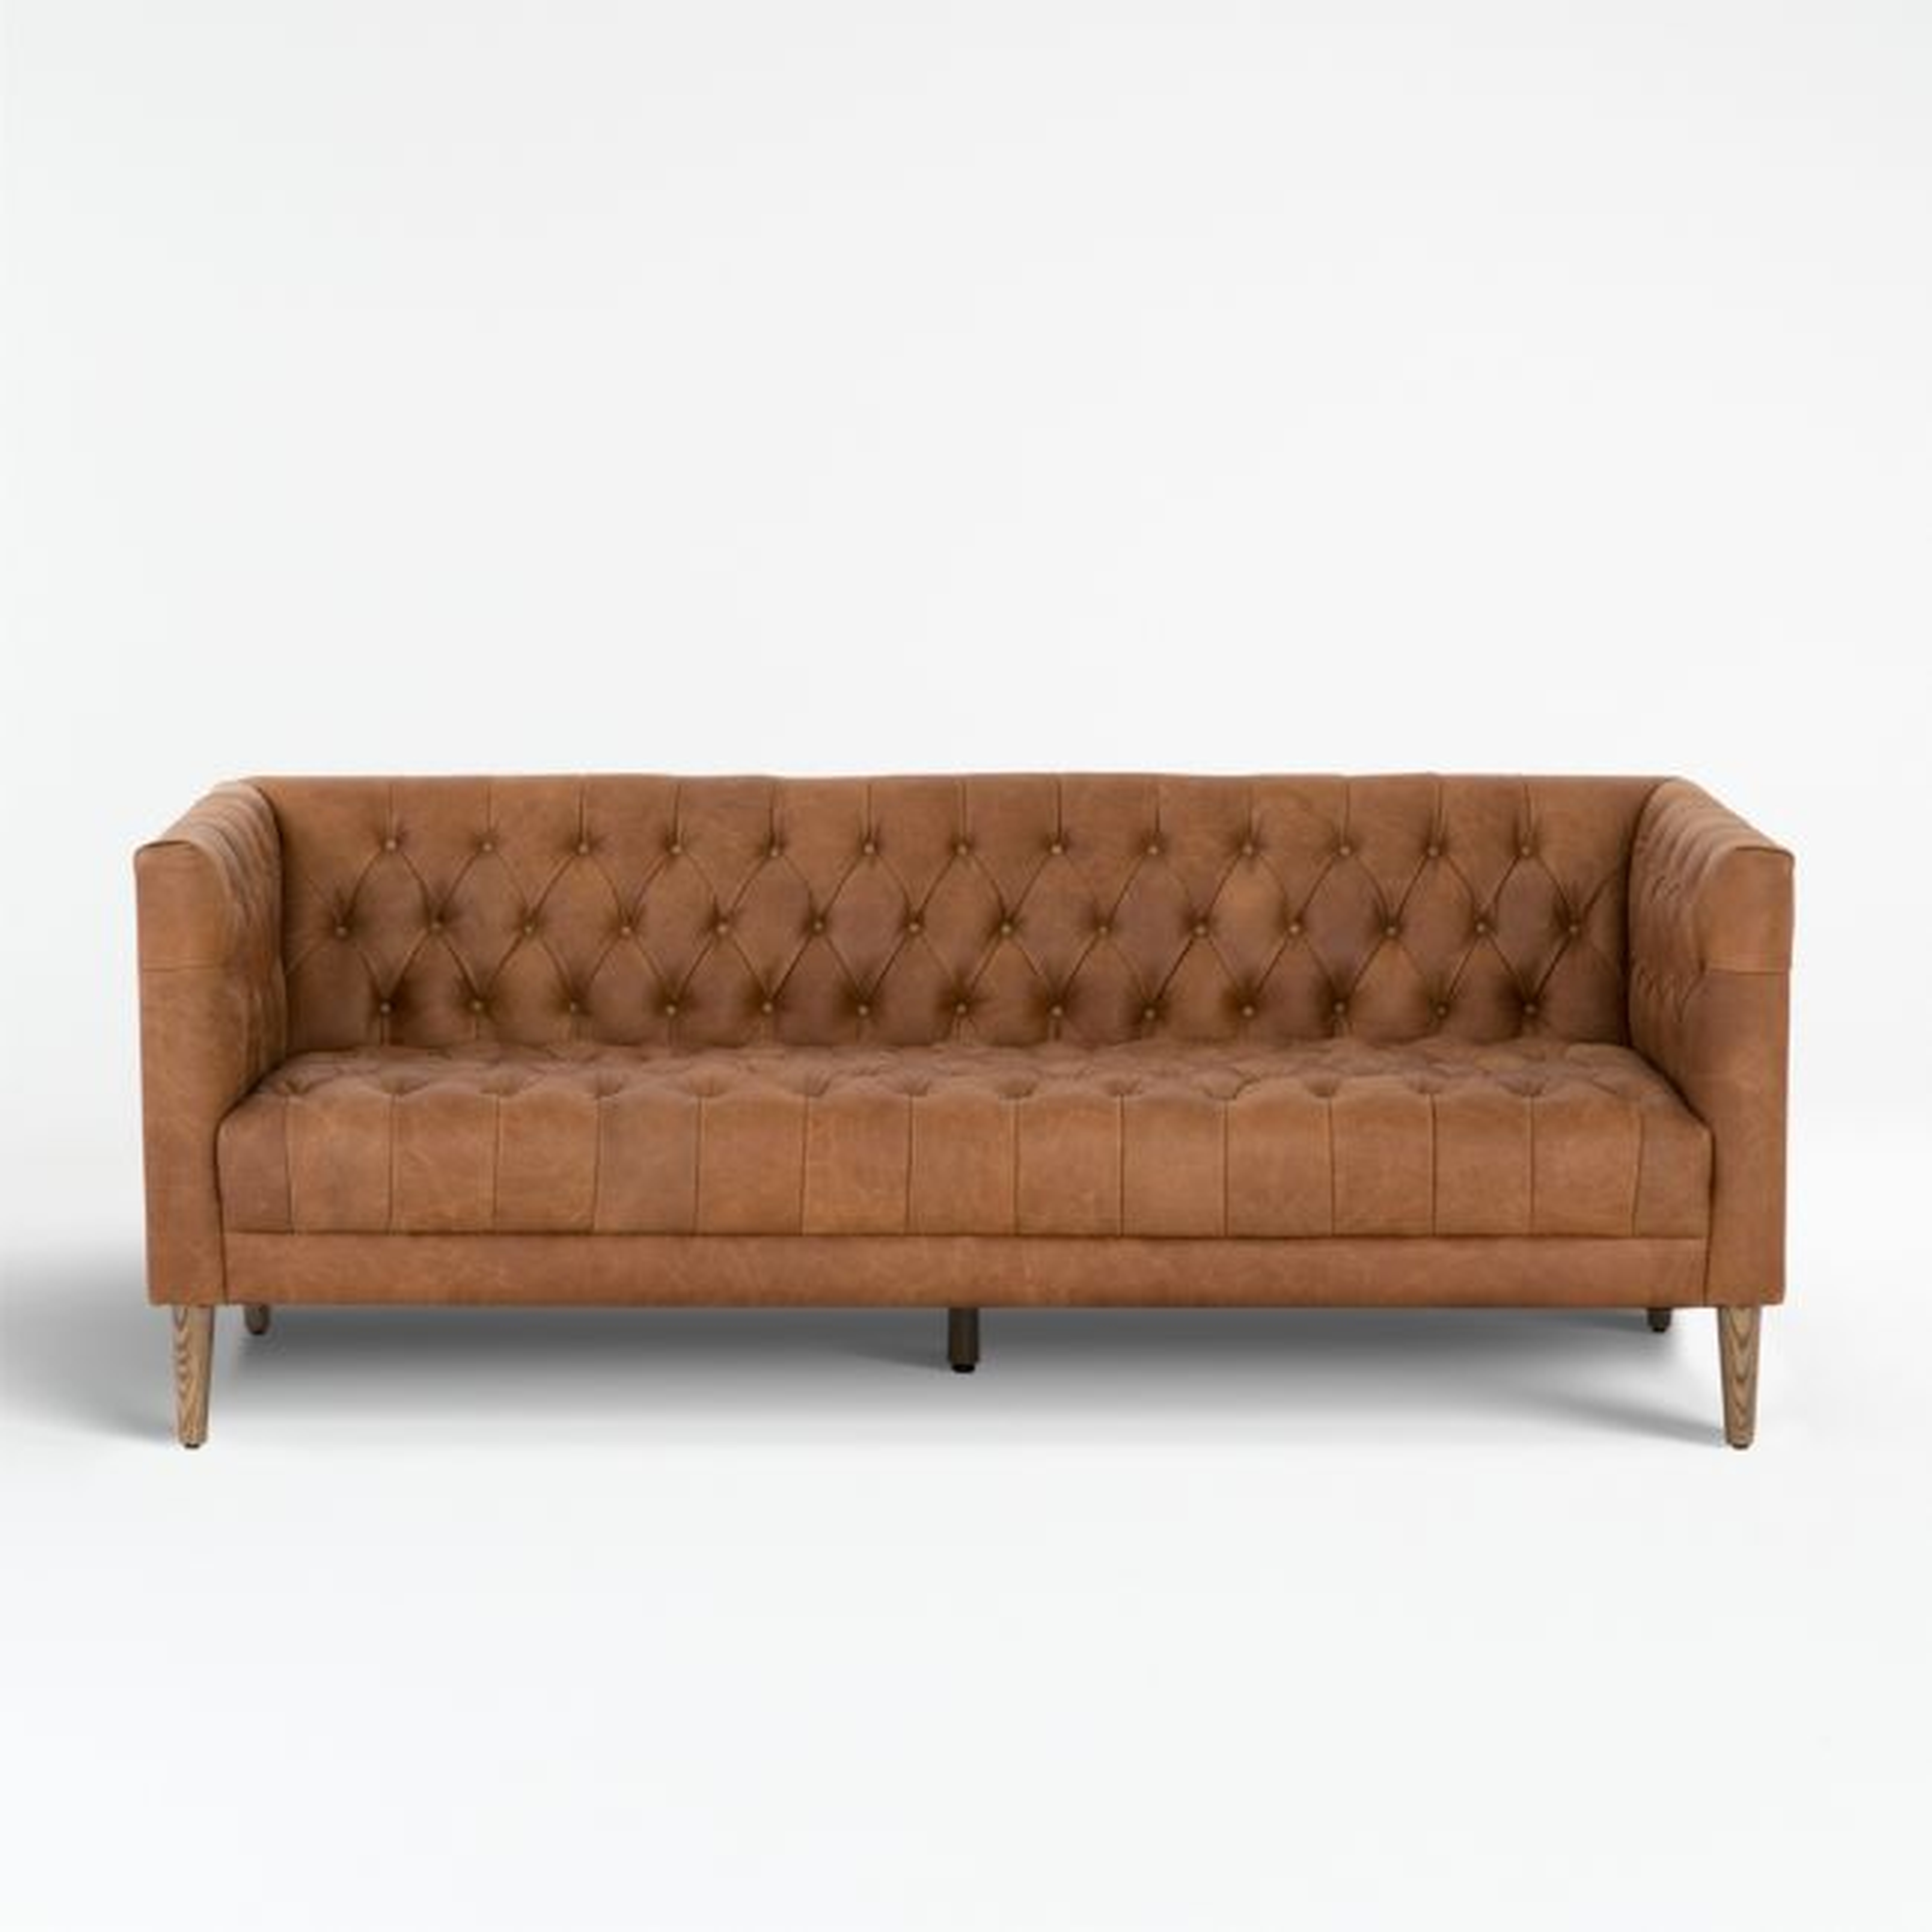 Rollins Natural Washed Camel Leather Button Tufted Sofa - Crate and Barrel